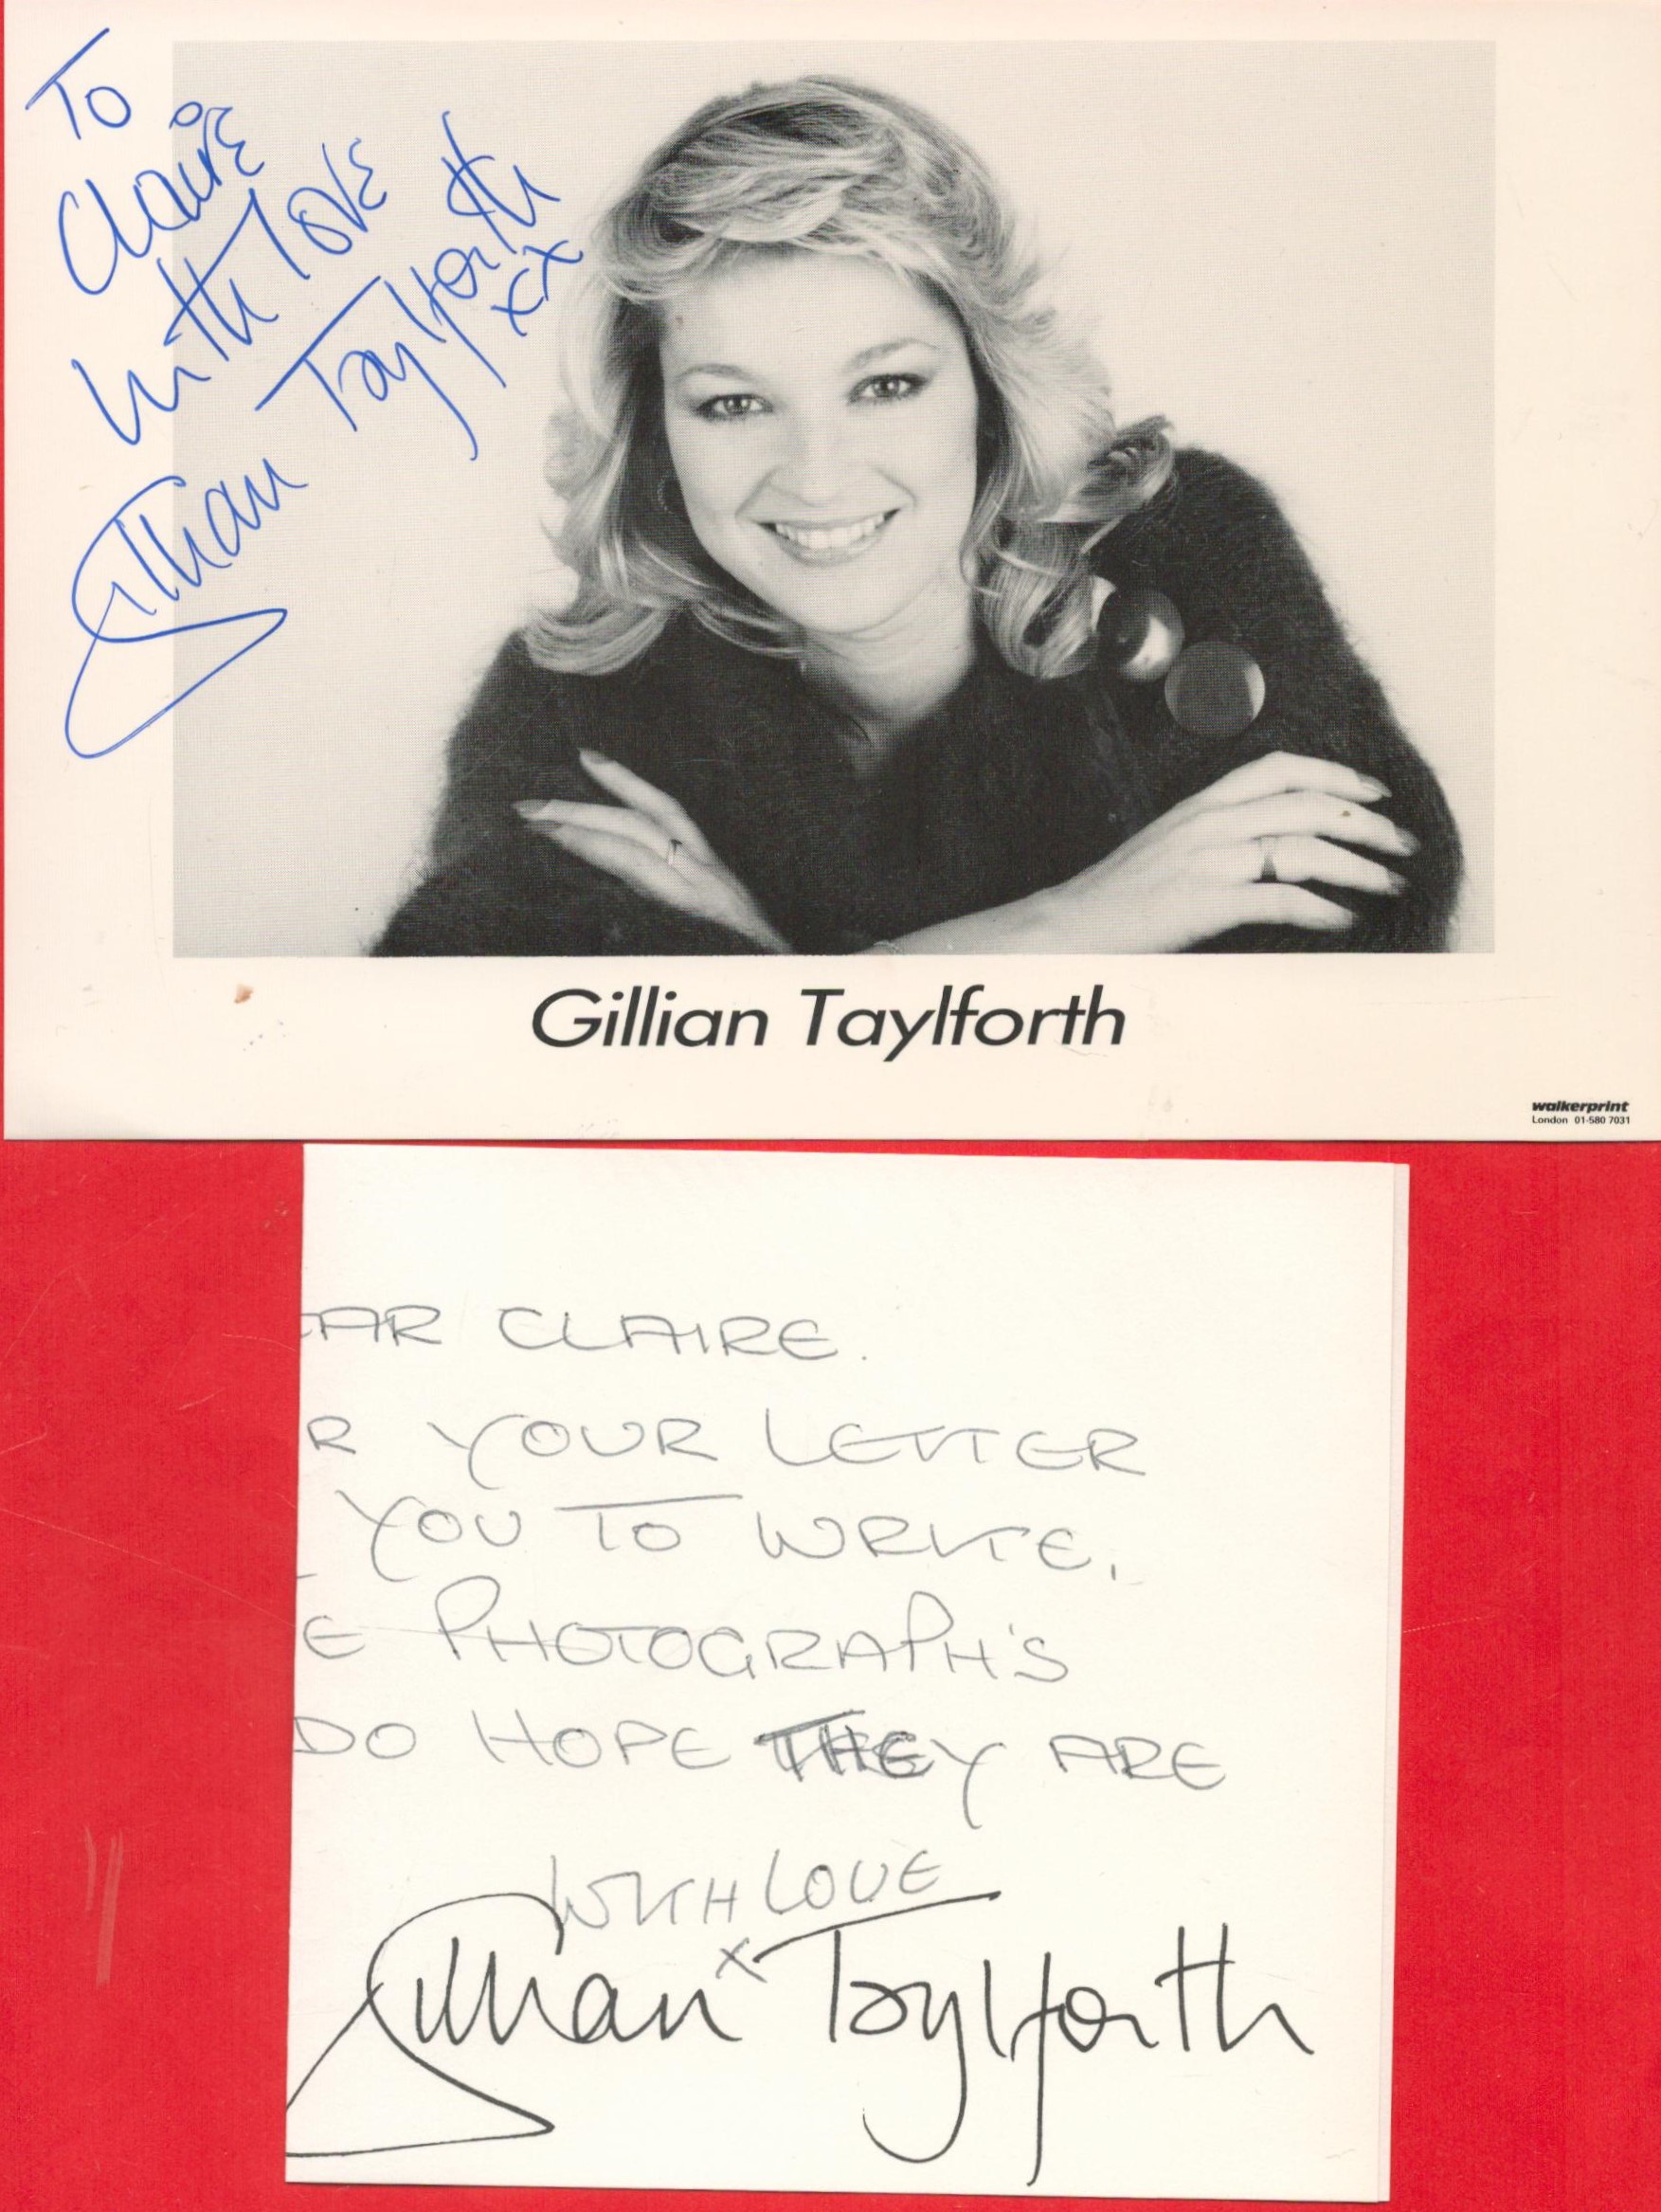 Actor, Gillian Taylforth signed 6x4 black and white promo photograph dedicated to Claire. This photo